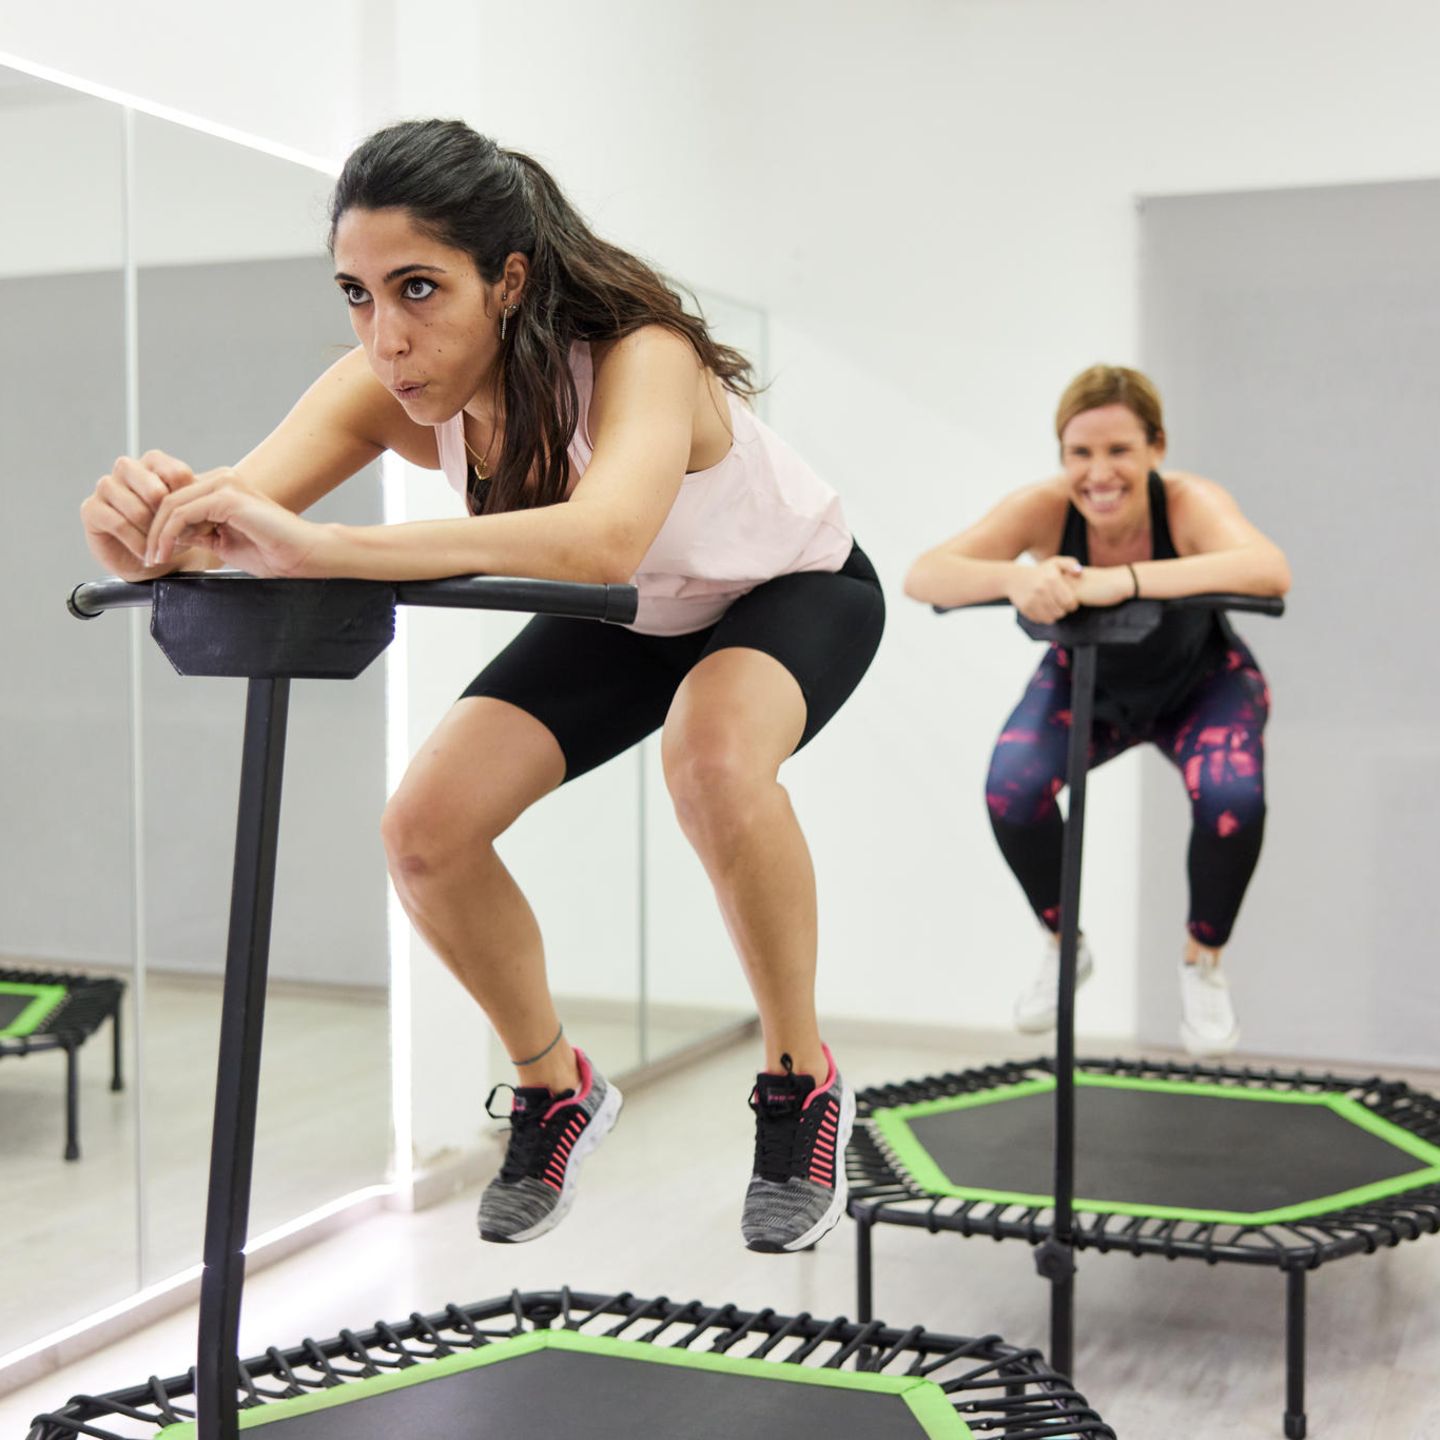 Jumping Fitness: Das Trampolin-Workout im Trend-Check